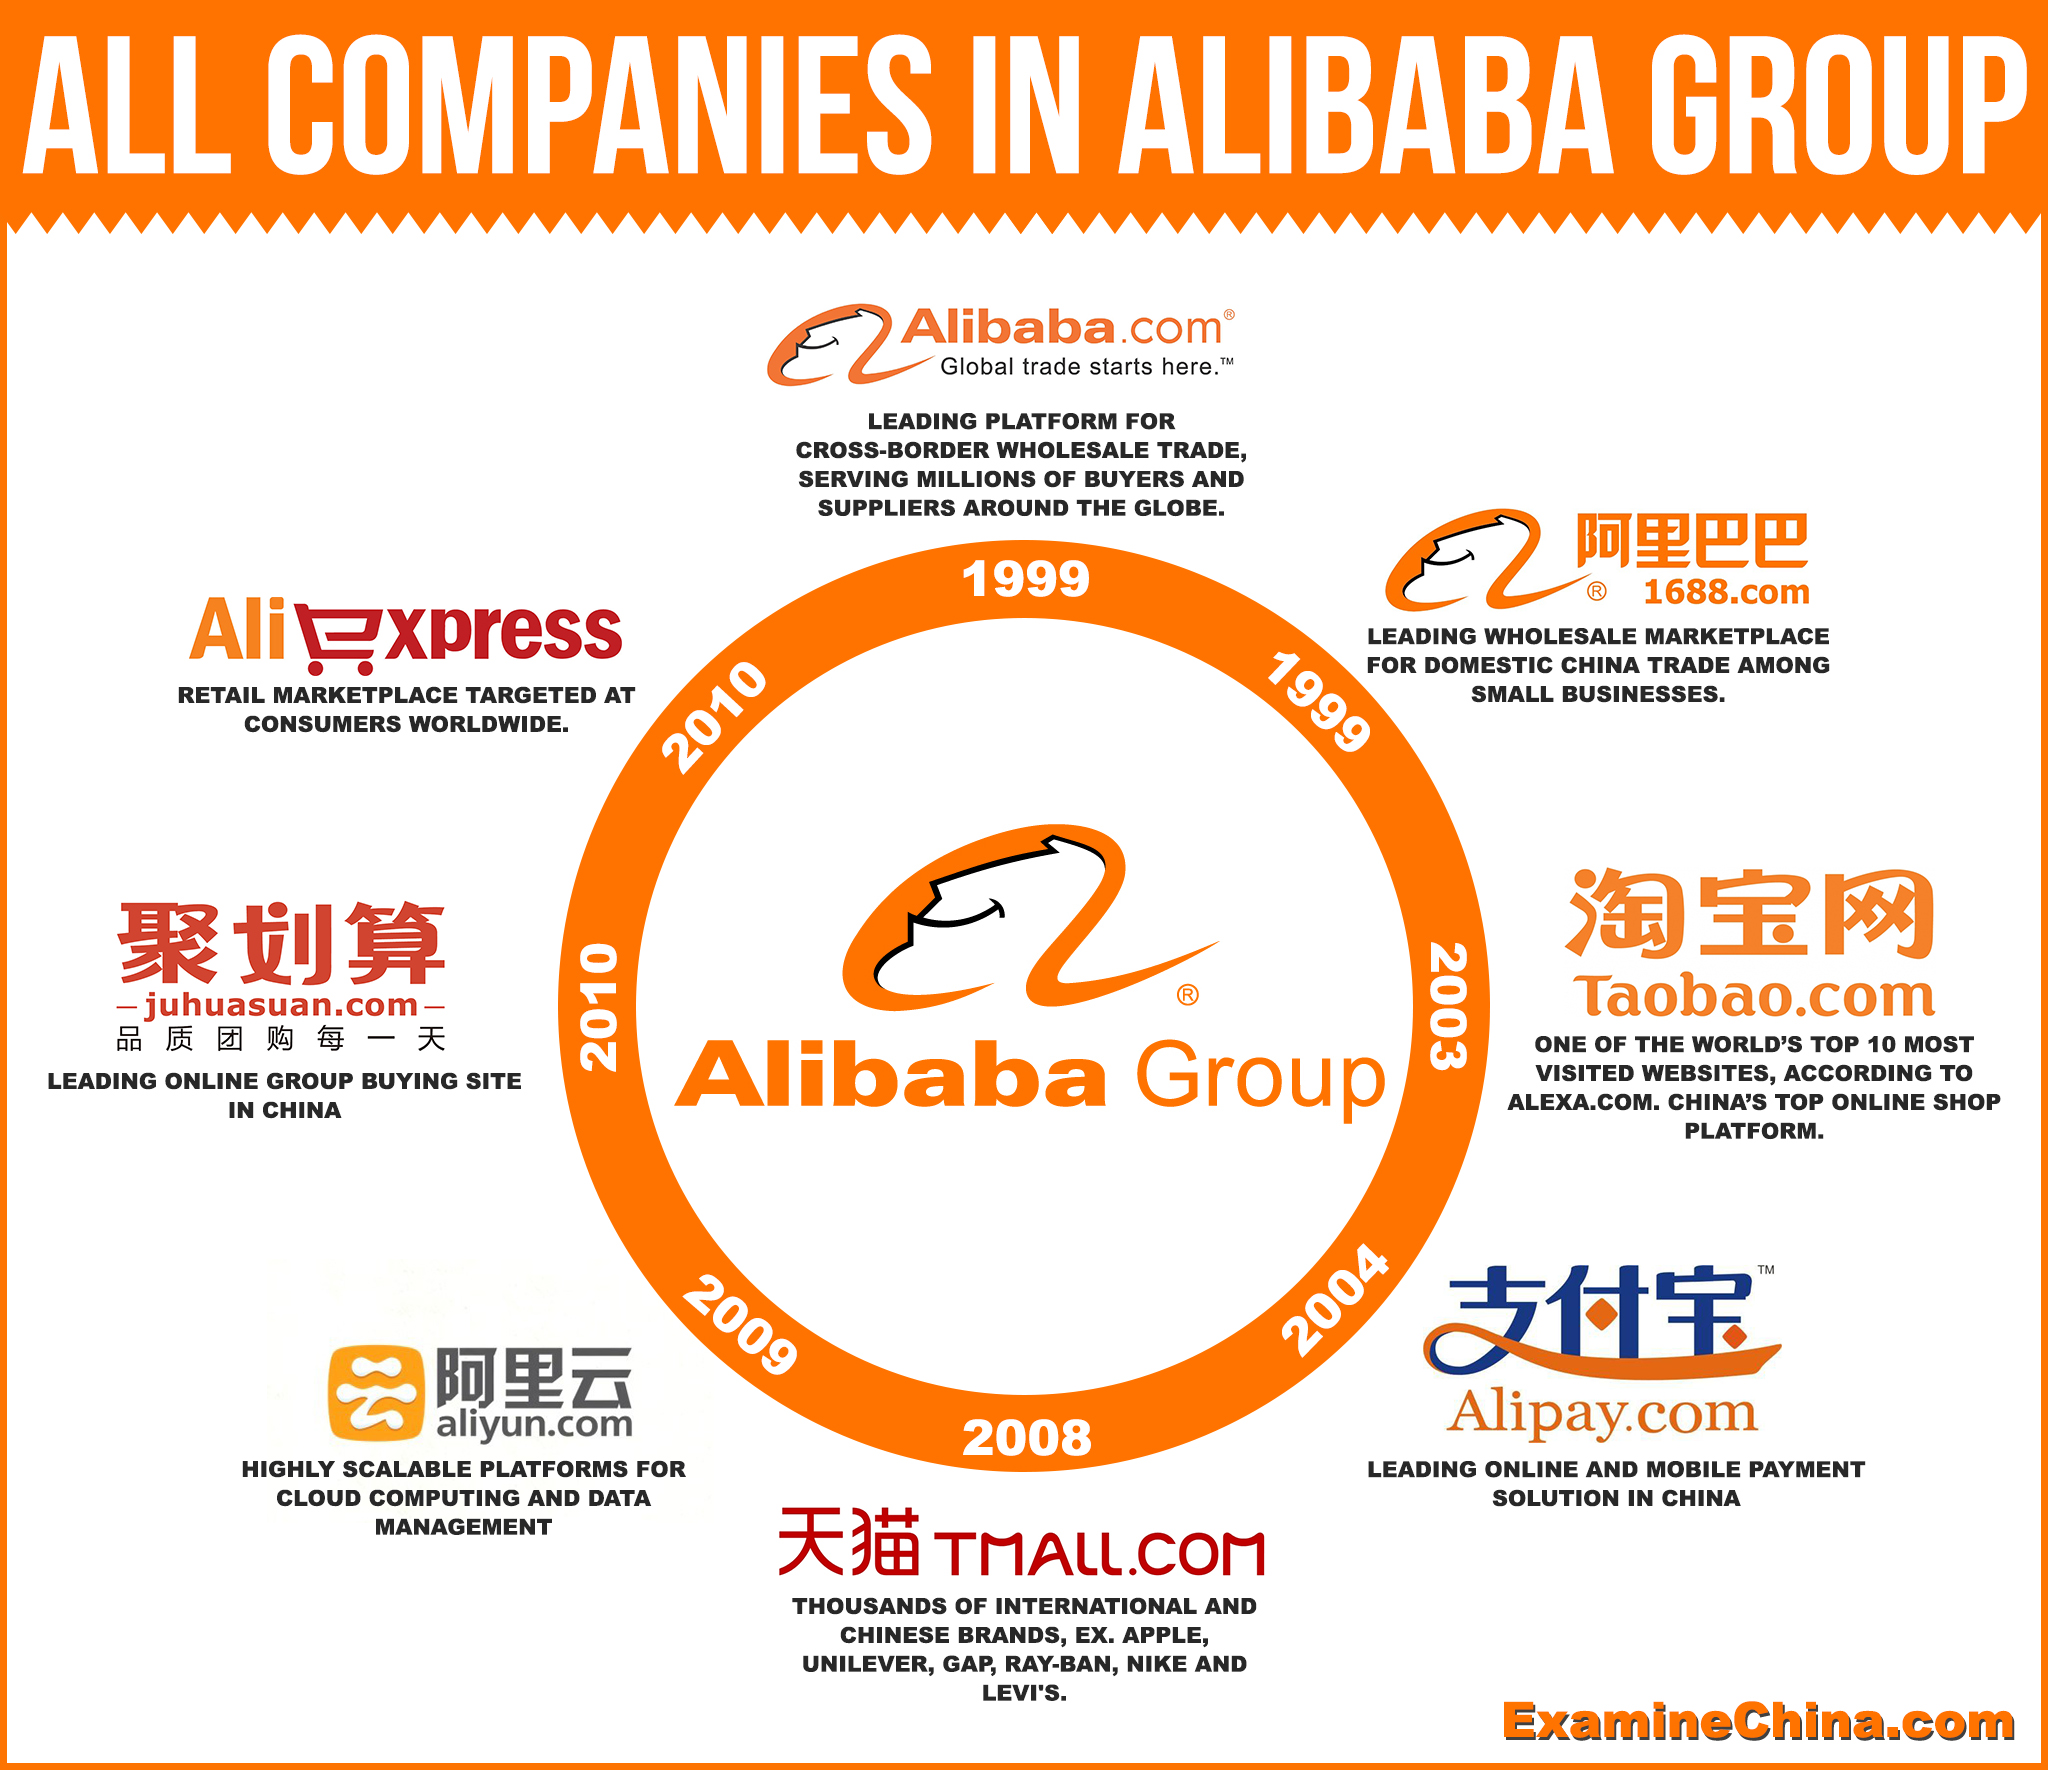 ALL COMPANIES IN ALIBABA GROUP